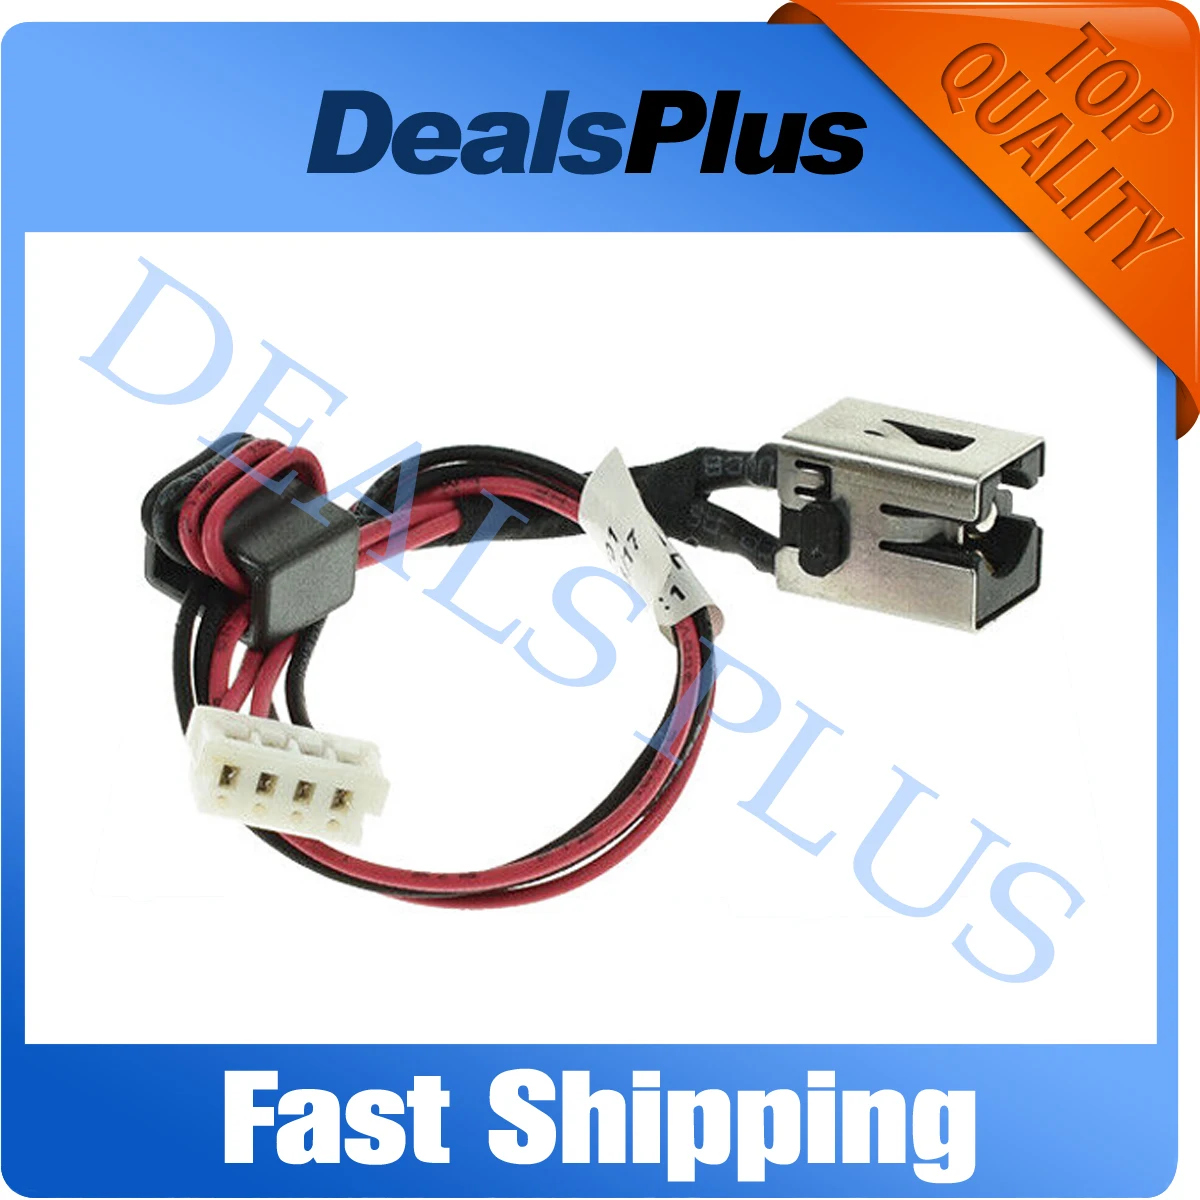 

New Replacement DC Power Jack Cable For Toshiba Satellite S955 S5373 L50 L55D L55DT L55-A 6017B0422501 C50 C55 C55D C55T